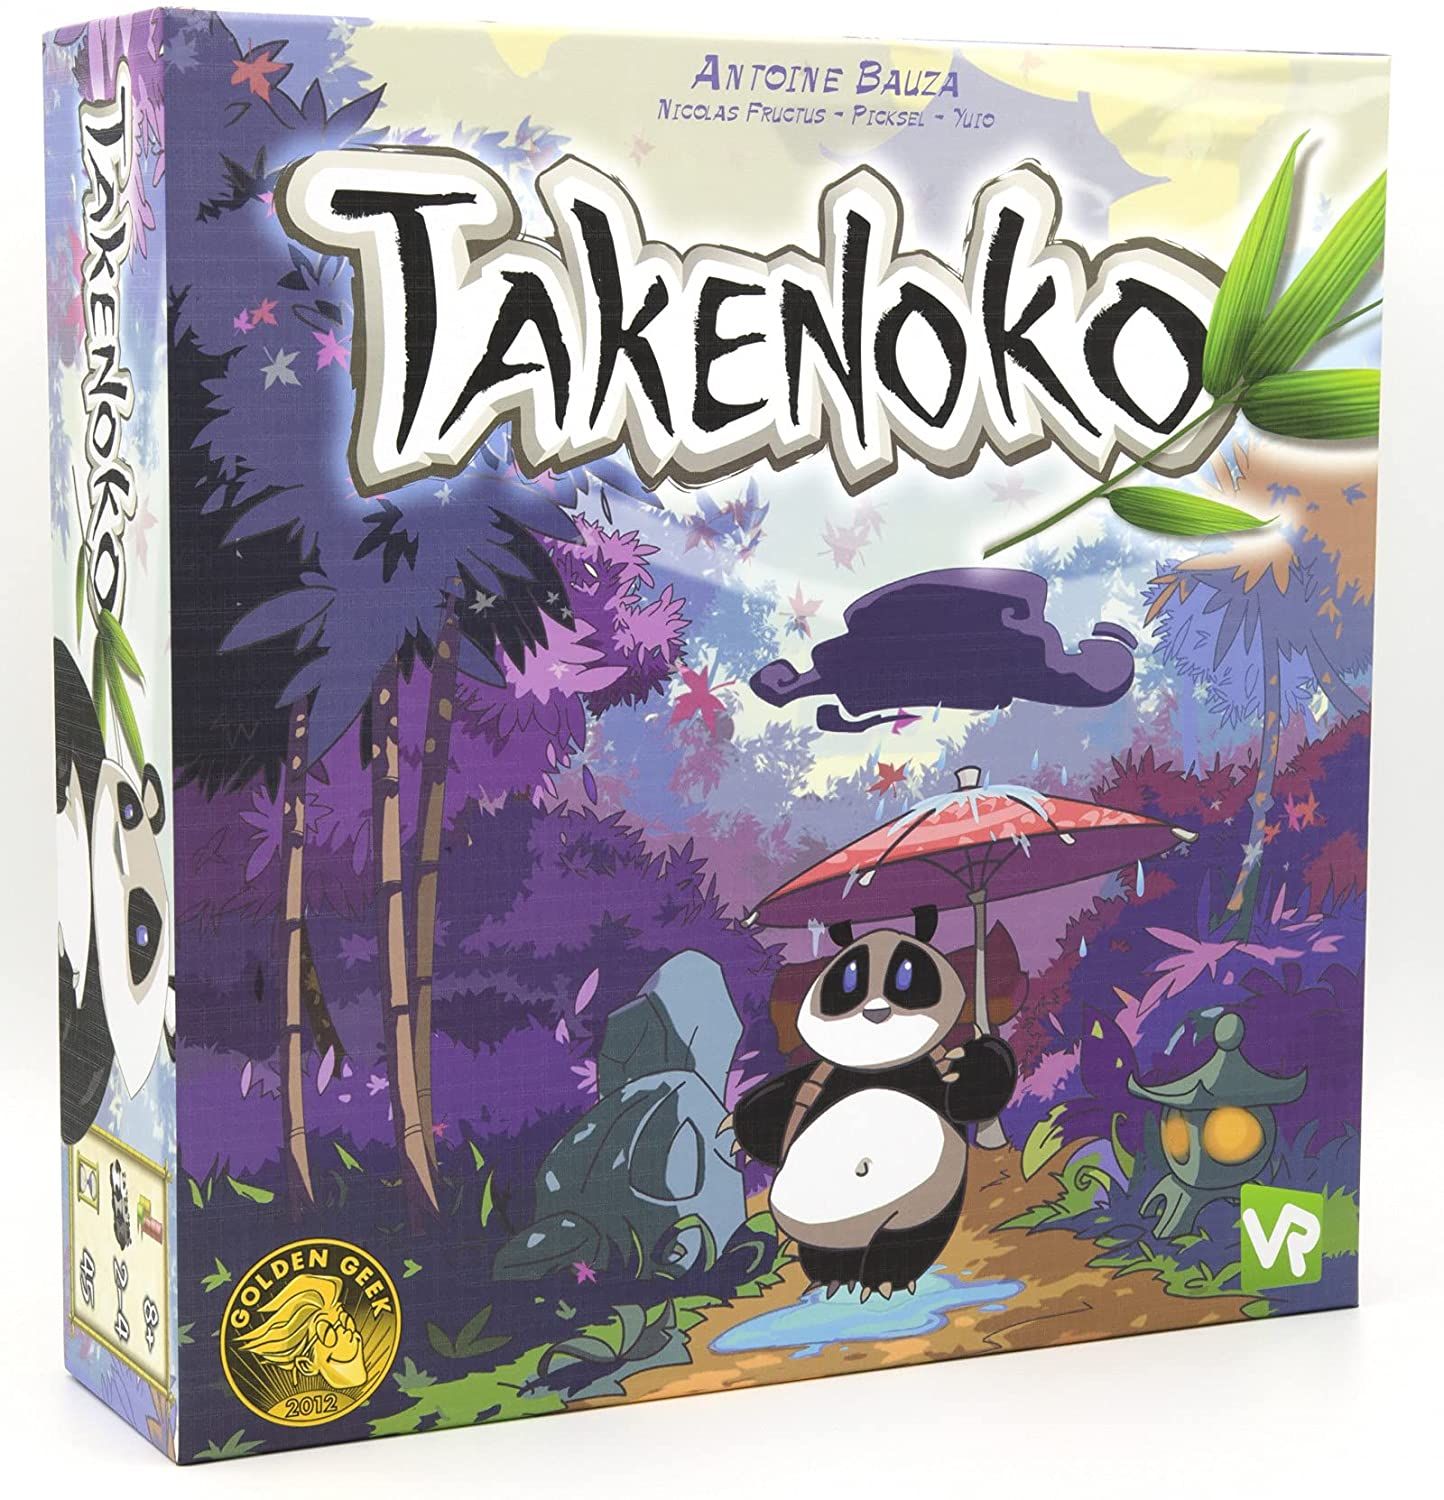 The Takenoko game box features cartoon graphics of the game's panda, along with an image of the eponymous Takenoko bamboo sprout.